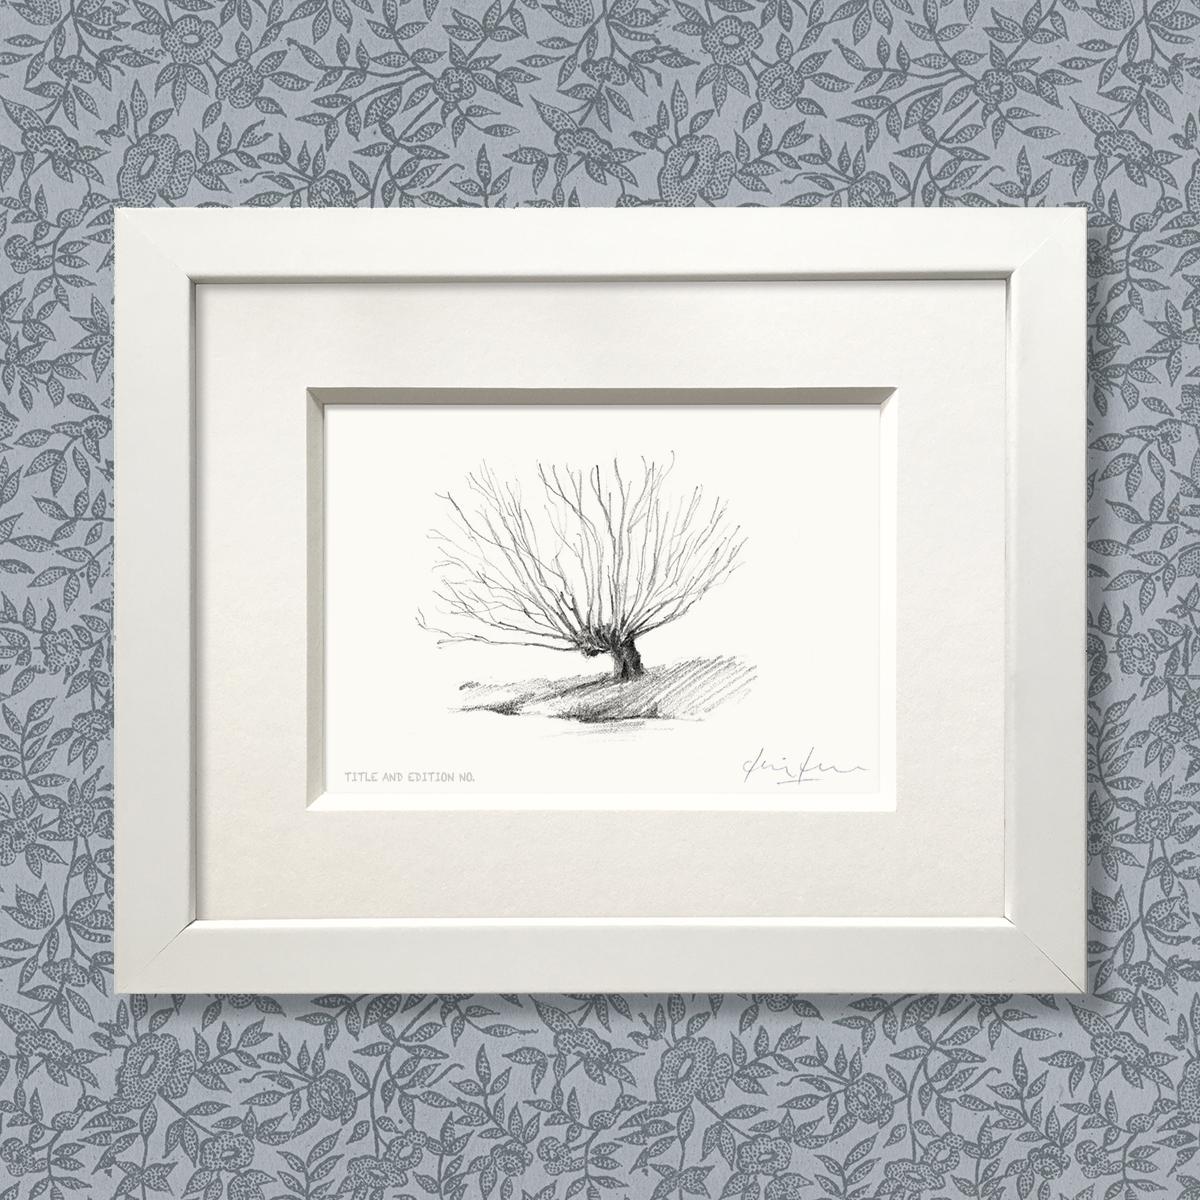 Limited edition print from pencil sketch of a willow tree in a white frame